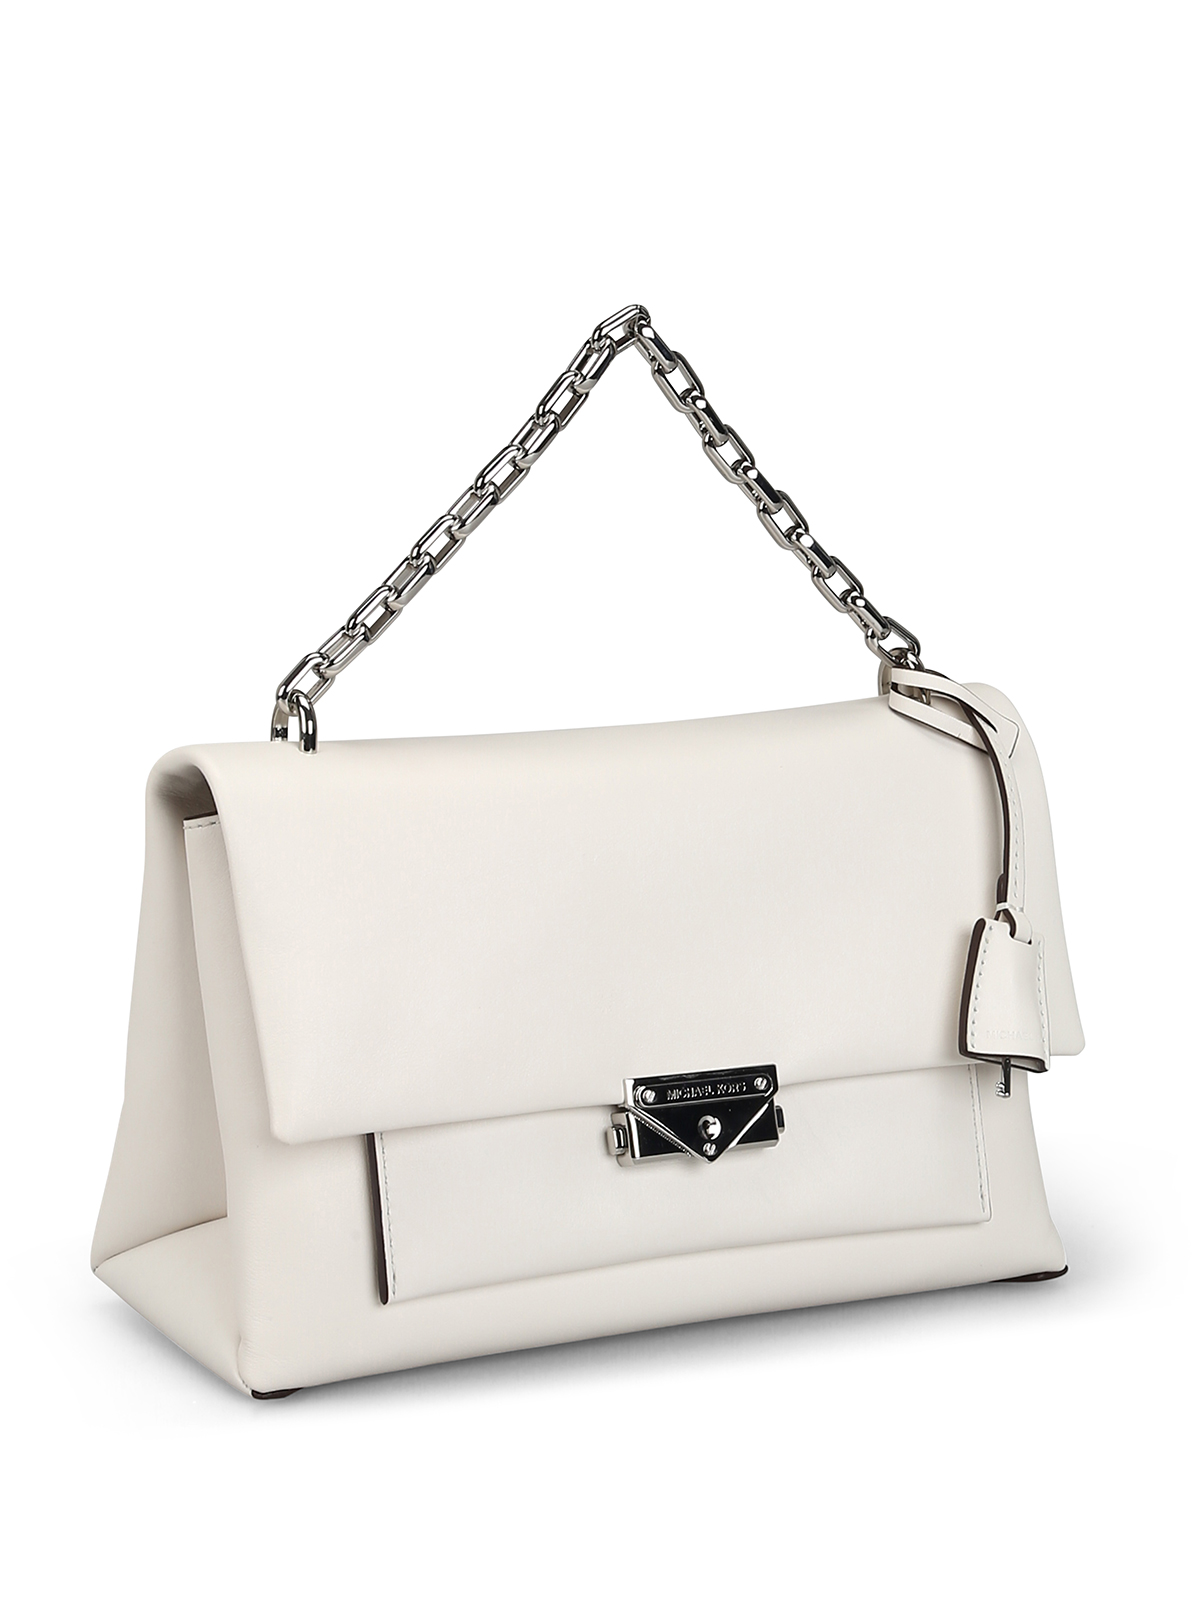 Cece L white smooth leather bag 